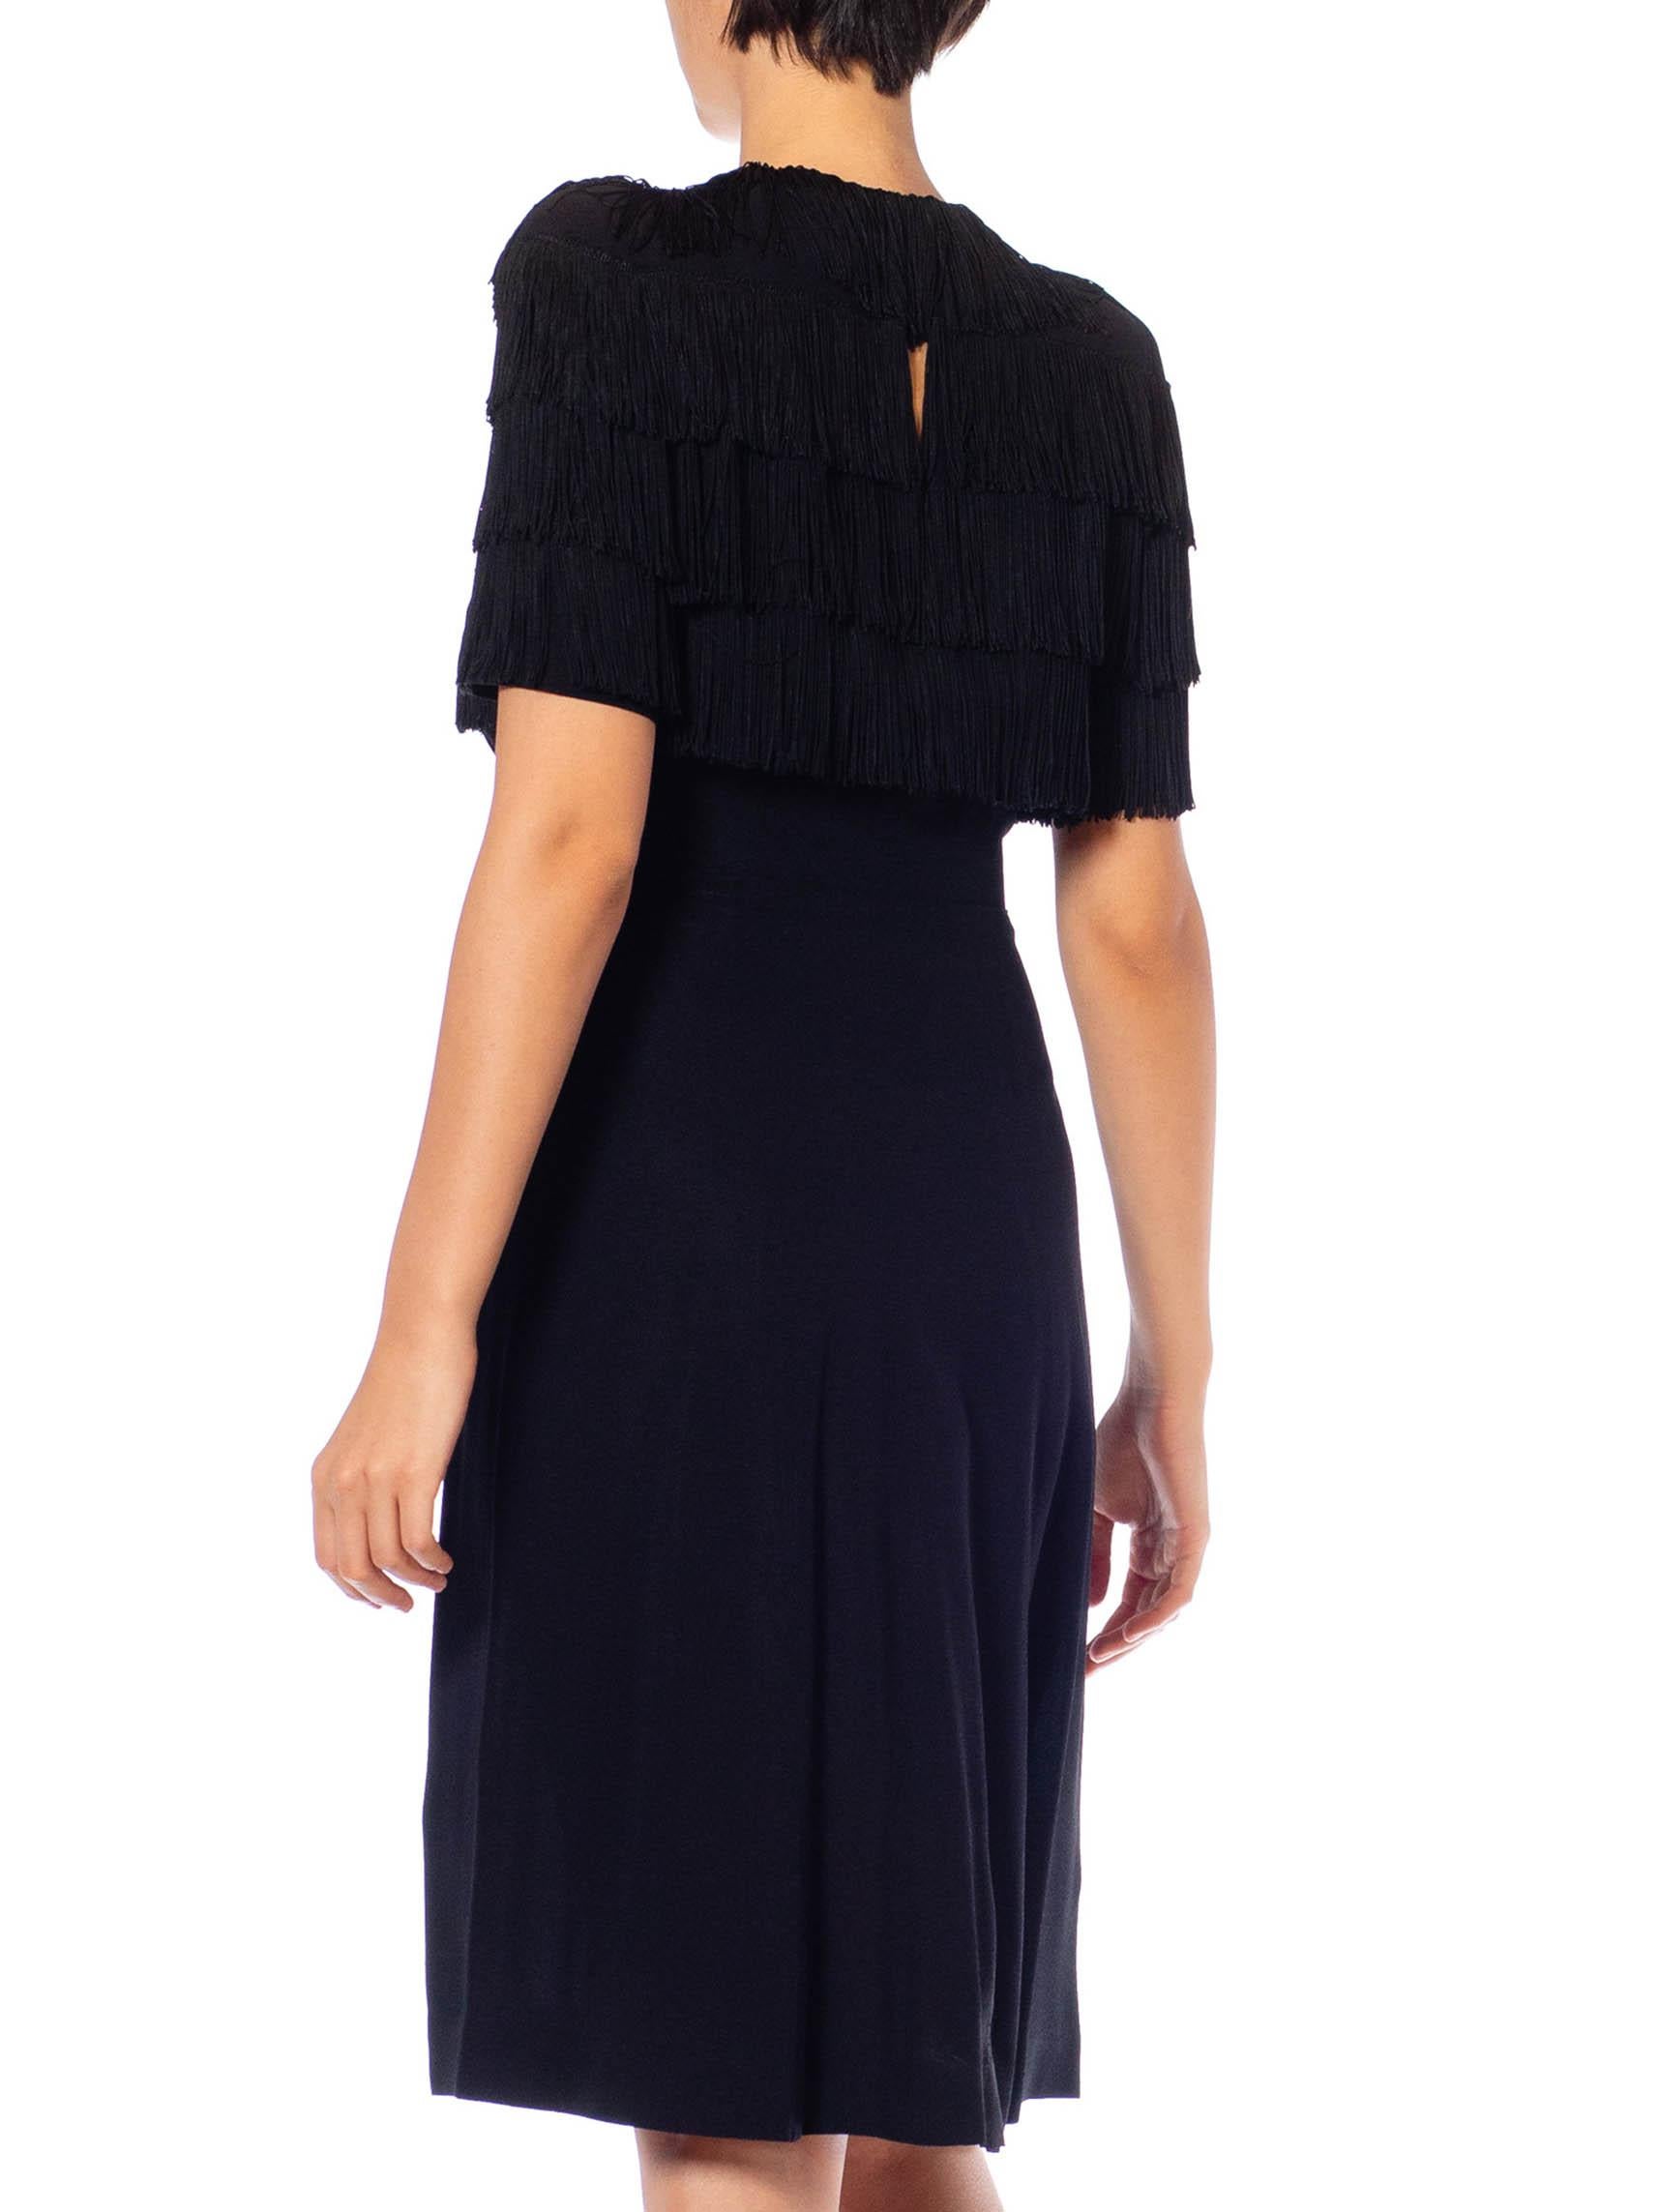 1940S Black Rayon Crepe Dietrich Style Fringed Bodice Cocktail Dress In Excellent Condition For Sale In New York, NY